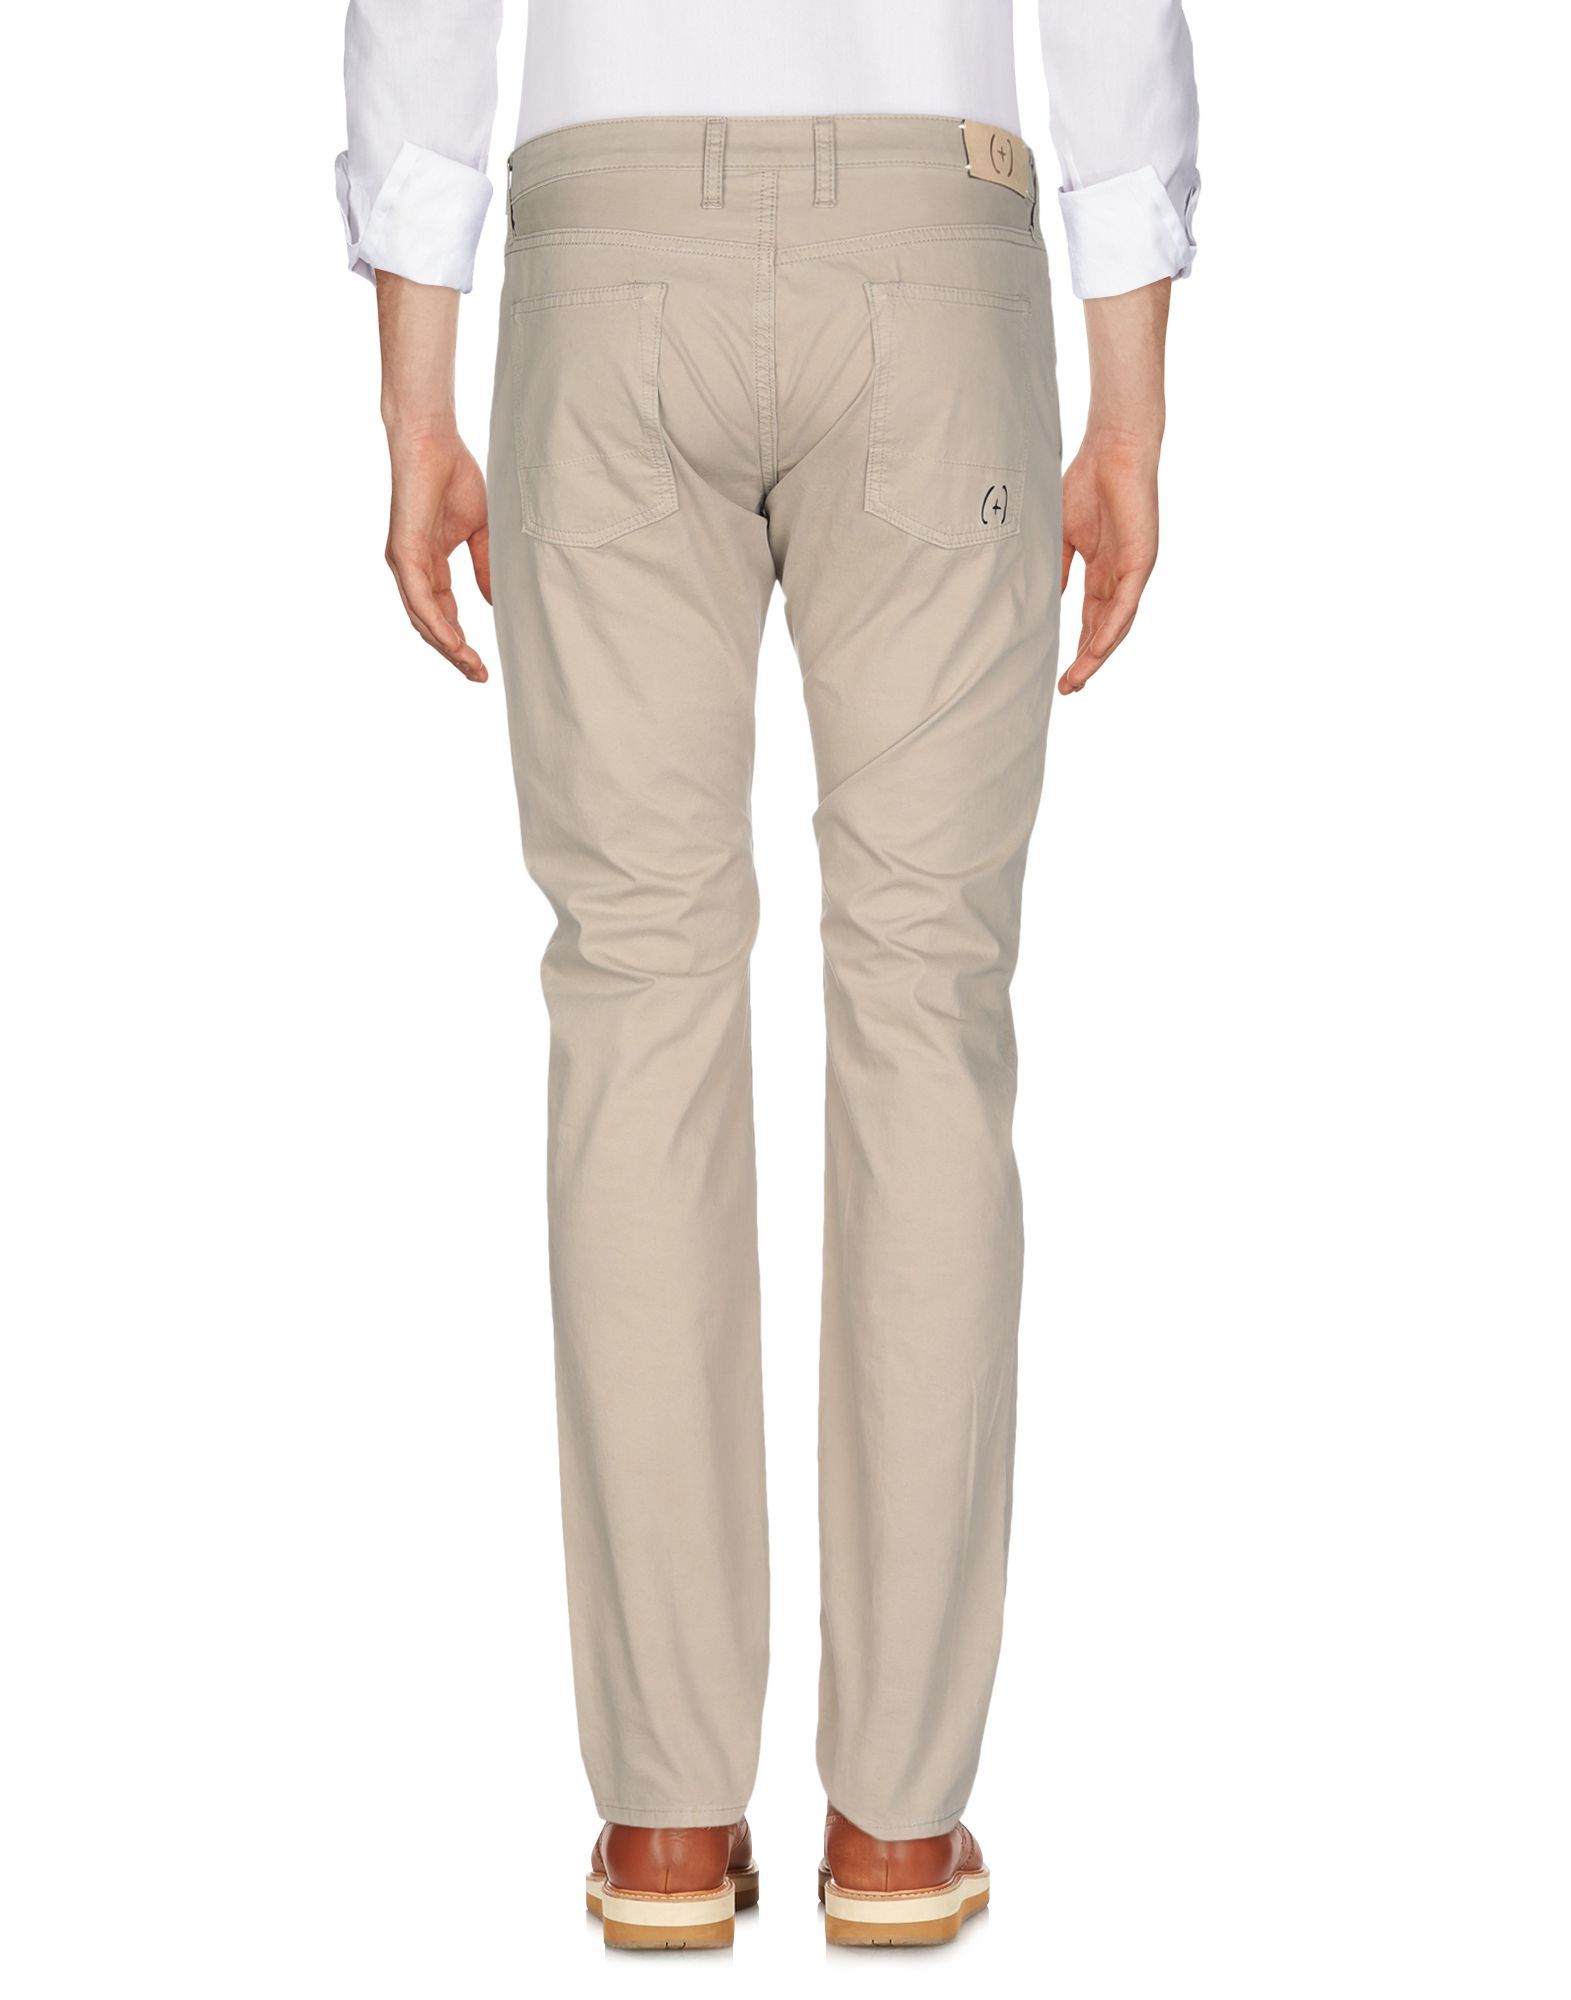 gabardine, logo, basic solid colour, mid rise, regular fit, tapered leg, button, zip, multipockets, chinos